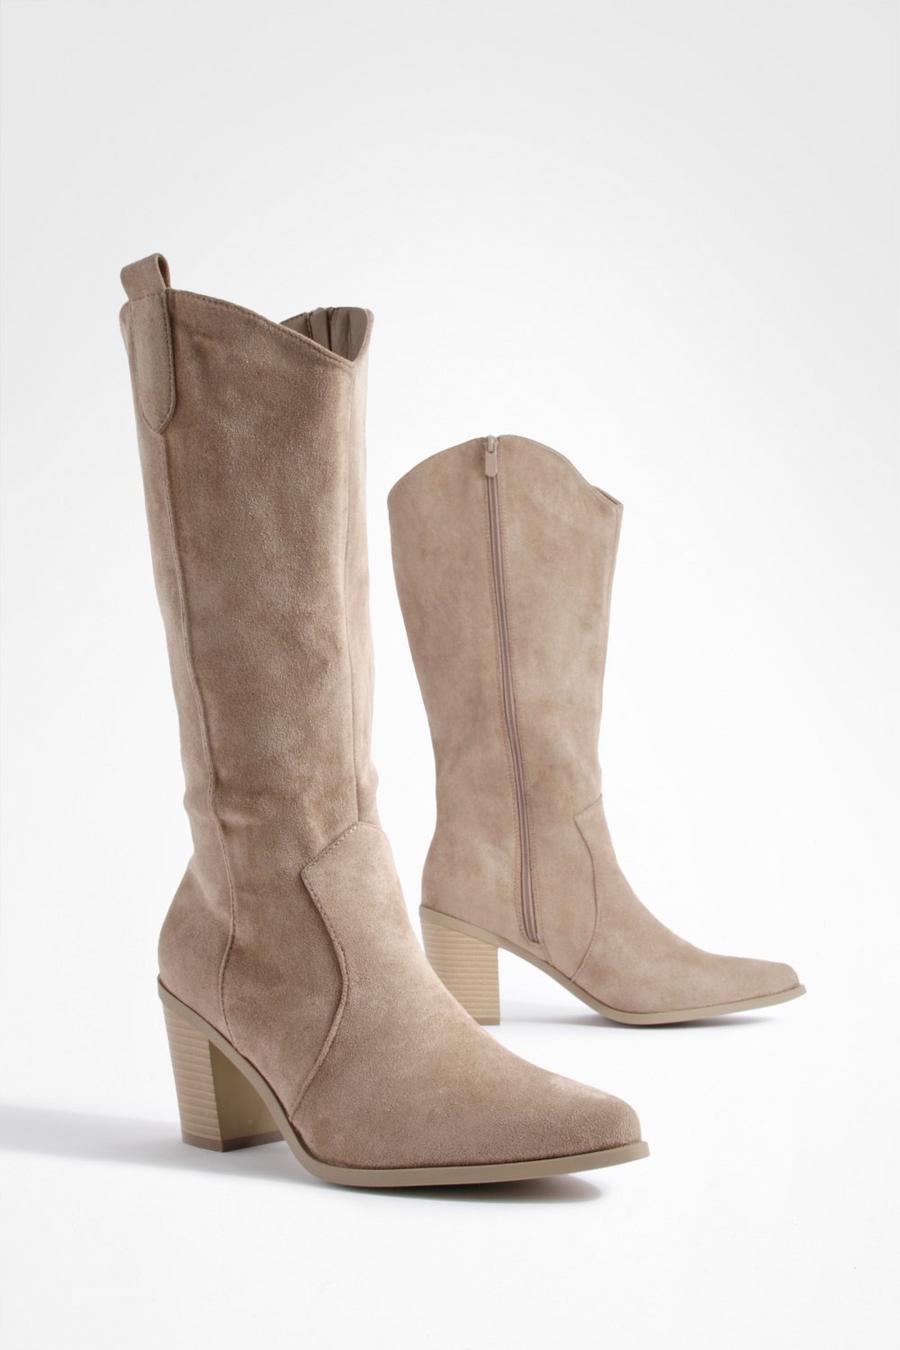 Taupe beige Tab Detail Knee High Western Cowboy Boots 